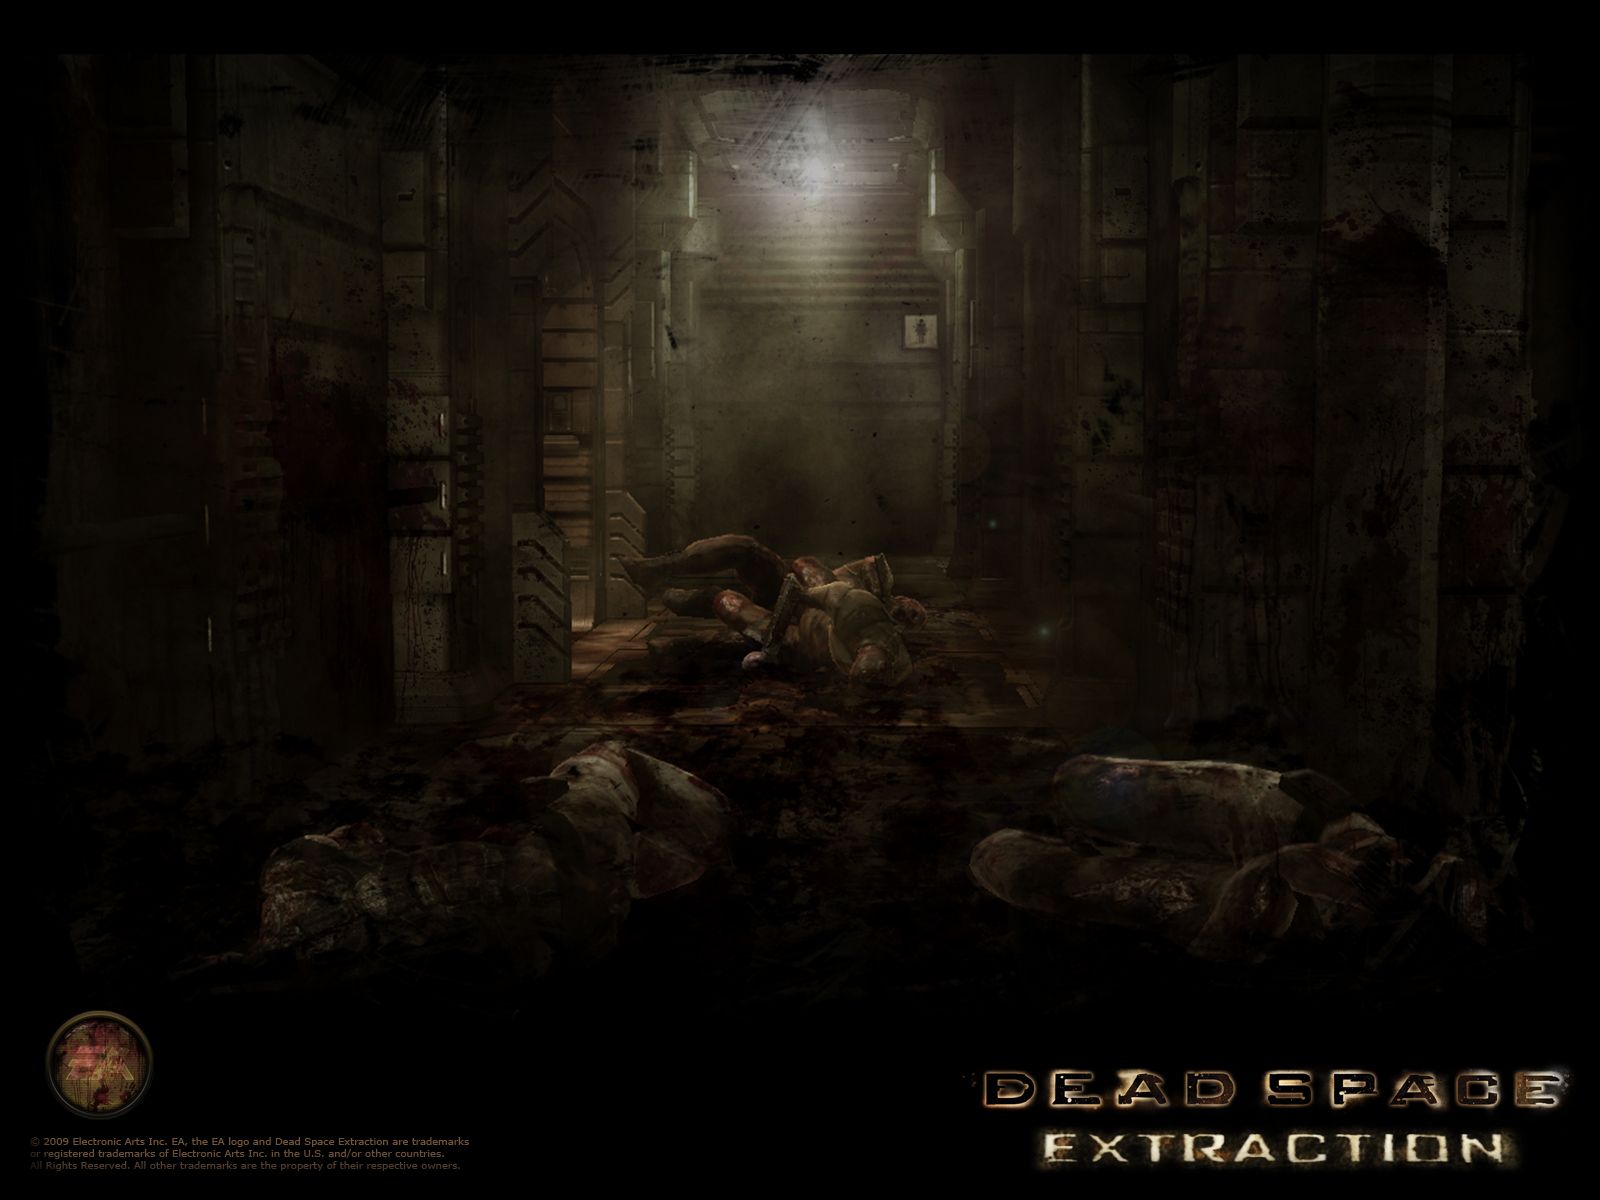 Dead Space Extraction Wallpaper. Awesome